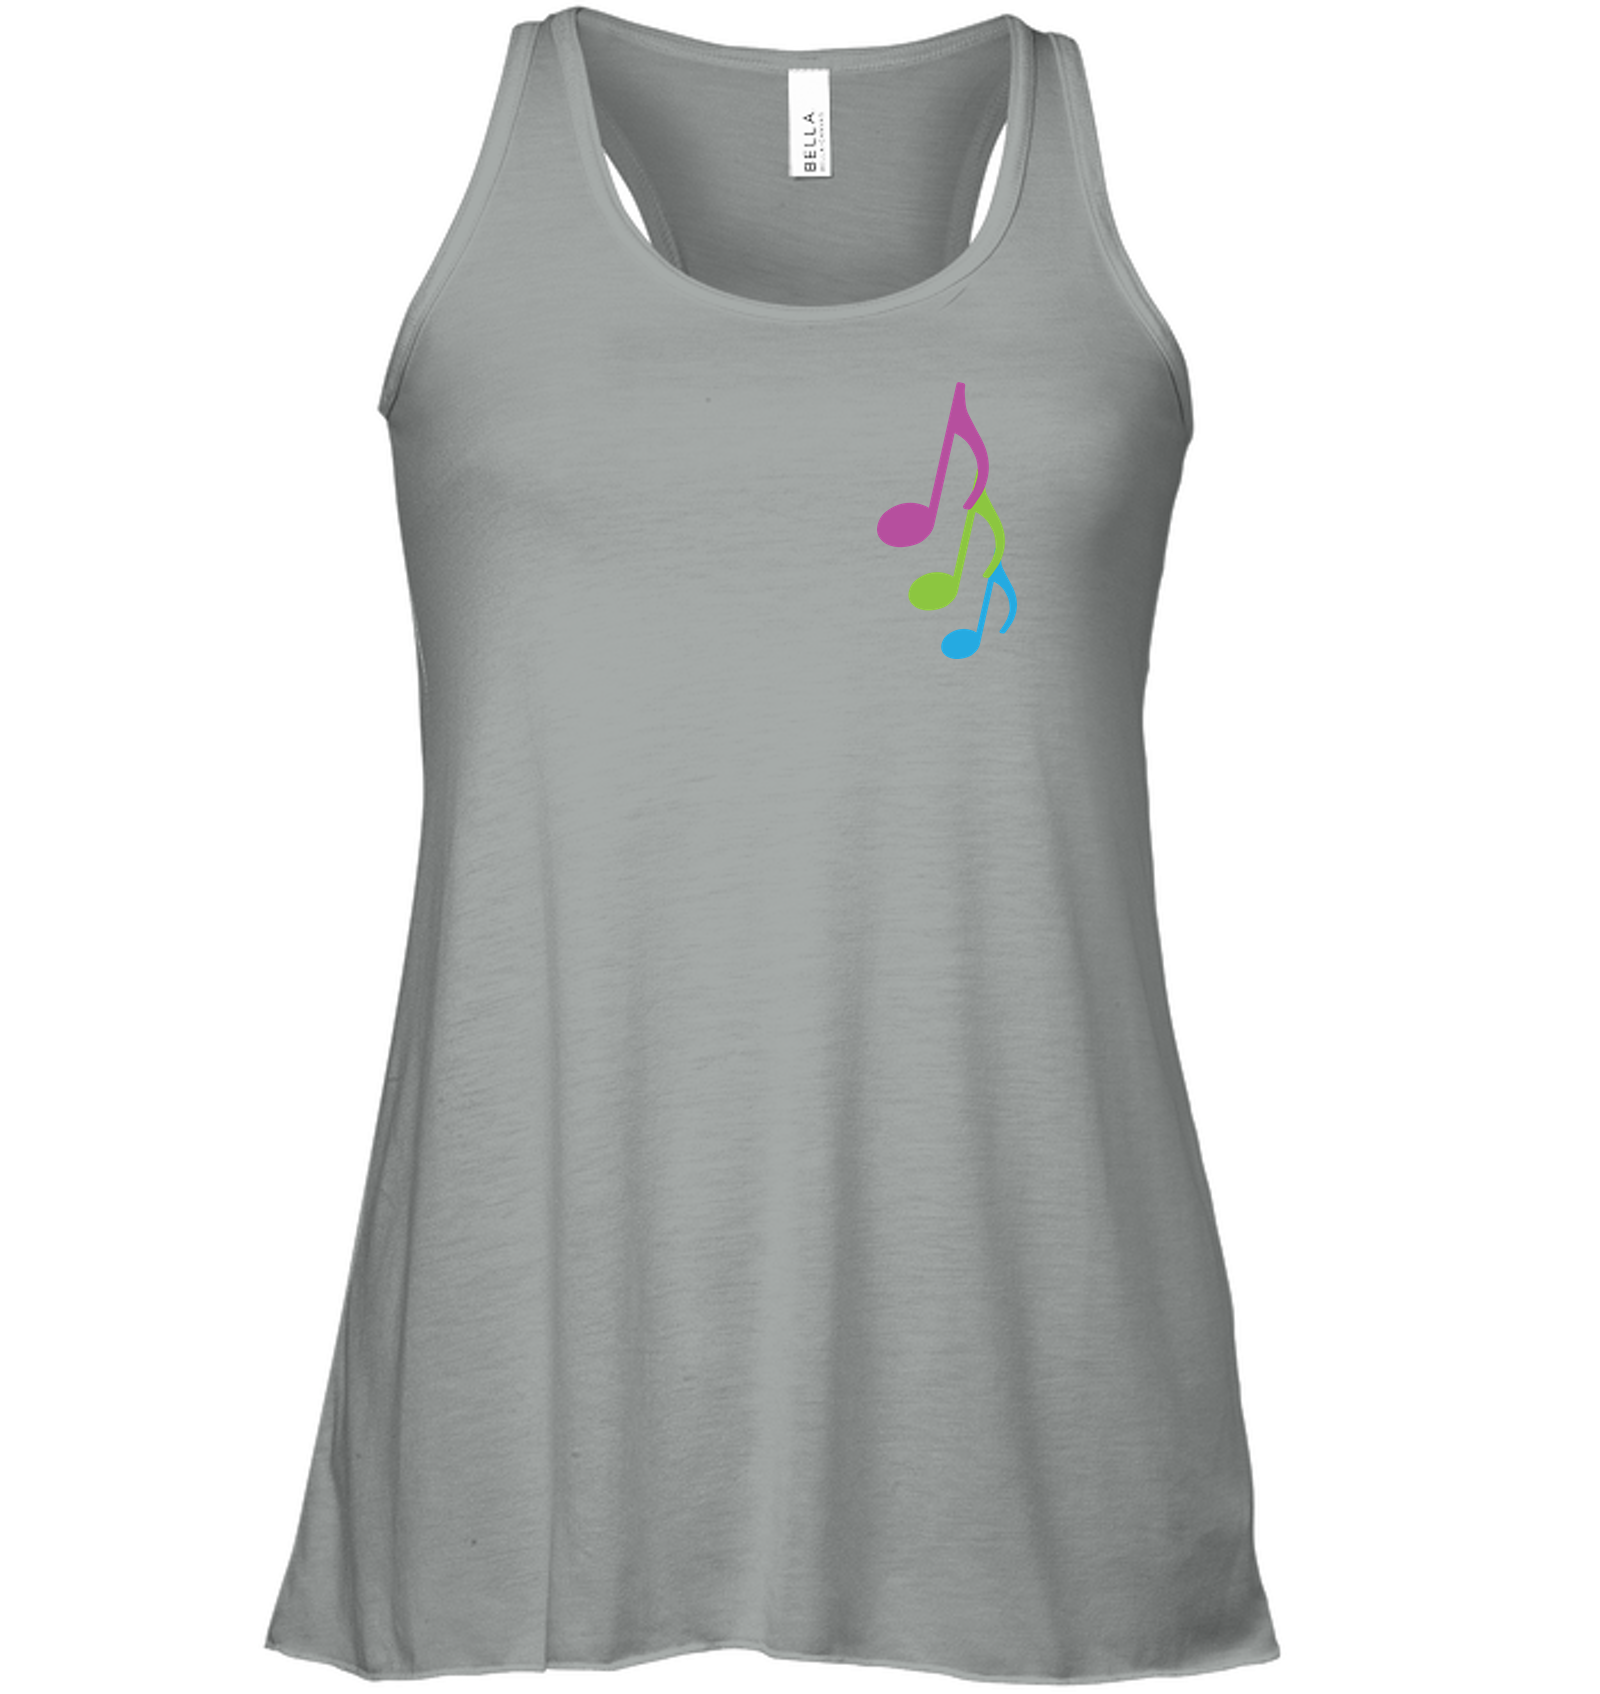 Three colorful musical notes (Pocket Size) - Bella + Canvas Women's Flowy Racerback Tank